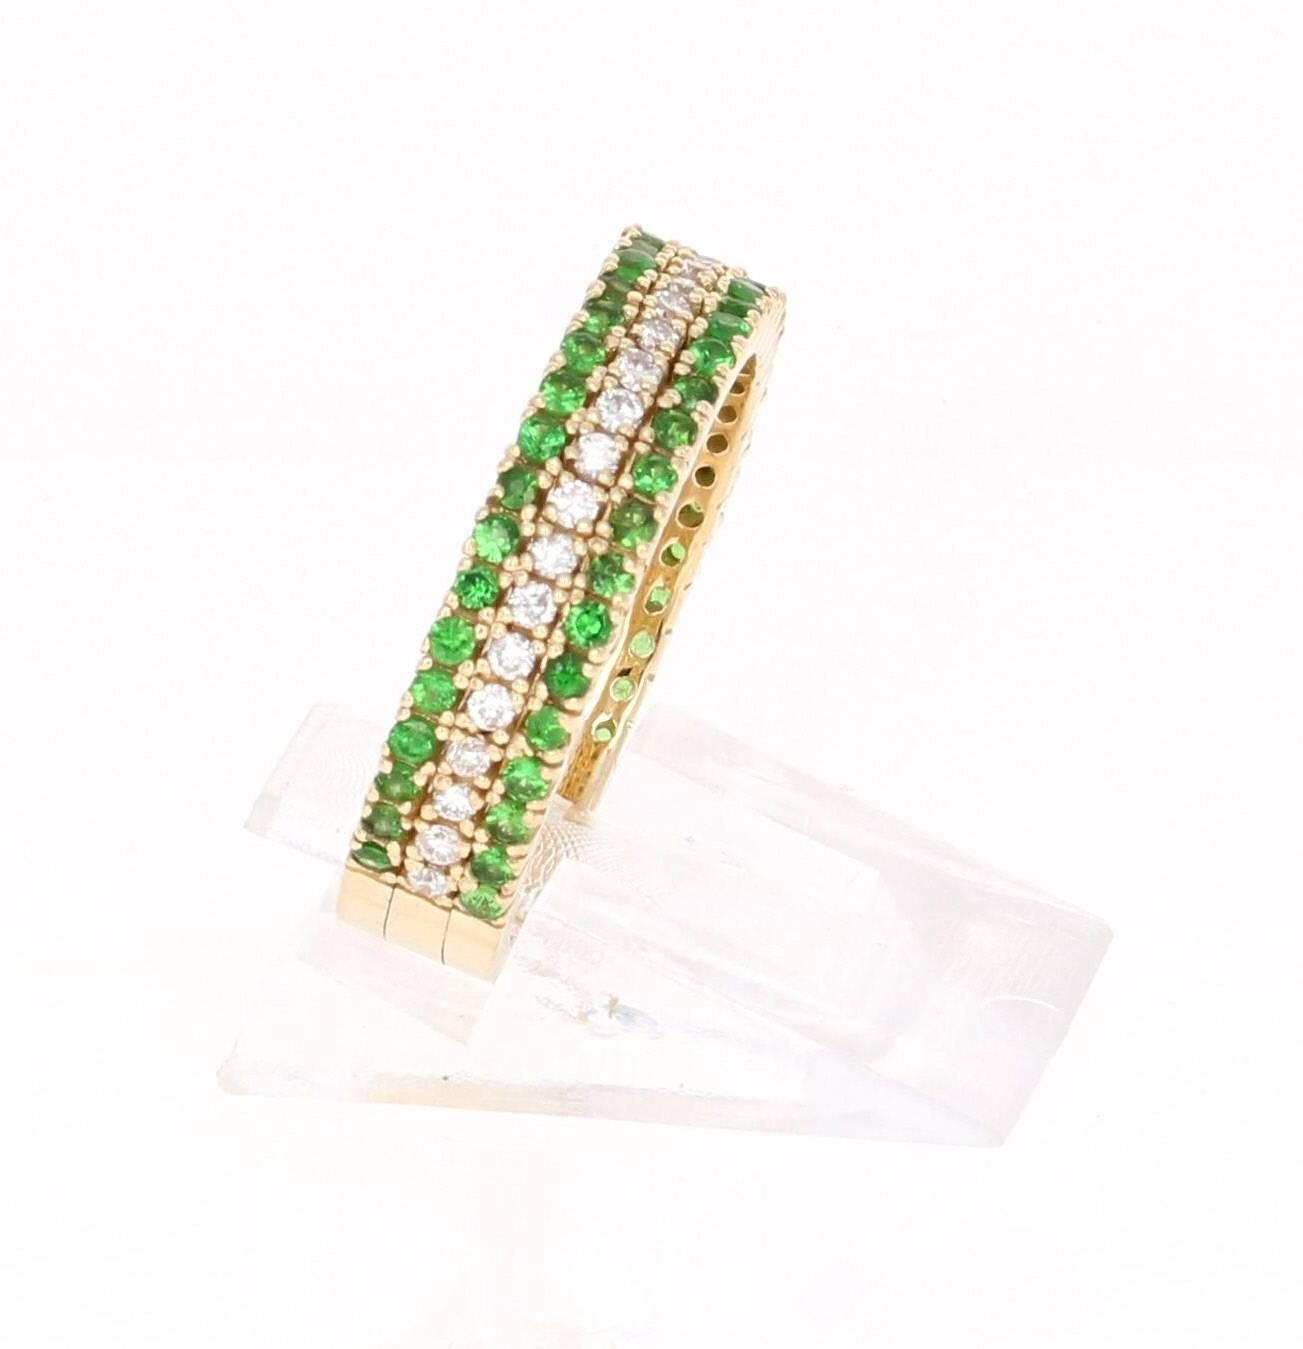 A cute and dainty Tsavorite and Diamond Band that is sure to be a great addition to your jewelry collection.  This band has 2 rows of Tsavorites and 1 row of Diamonds. There are a total of 60 Round Cut Tsavorites that weigh 0.67 carats and 30 Round